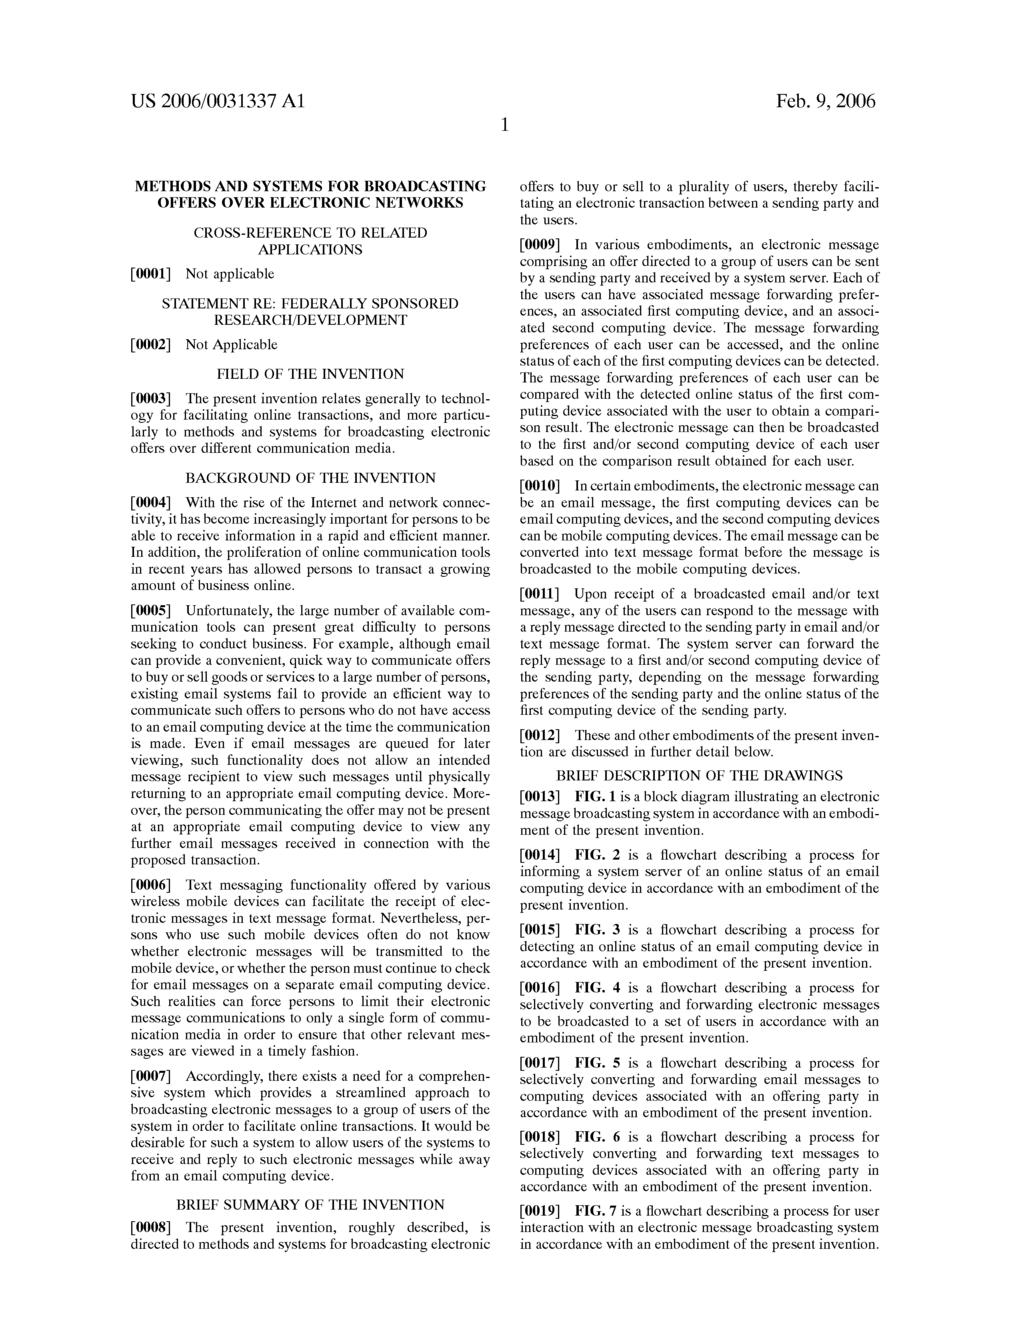 US 2006/0031337 A1 Feb. 9, 2006 METHODS AND SYSTEMS FOR BROADCASTING OFFERS OVER ELECTRONIC NETWORKS CROSS-REFERENCE TO RELATED APPLICATIONS 0001.